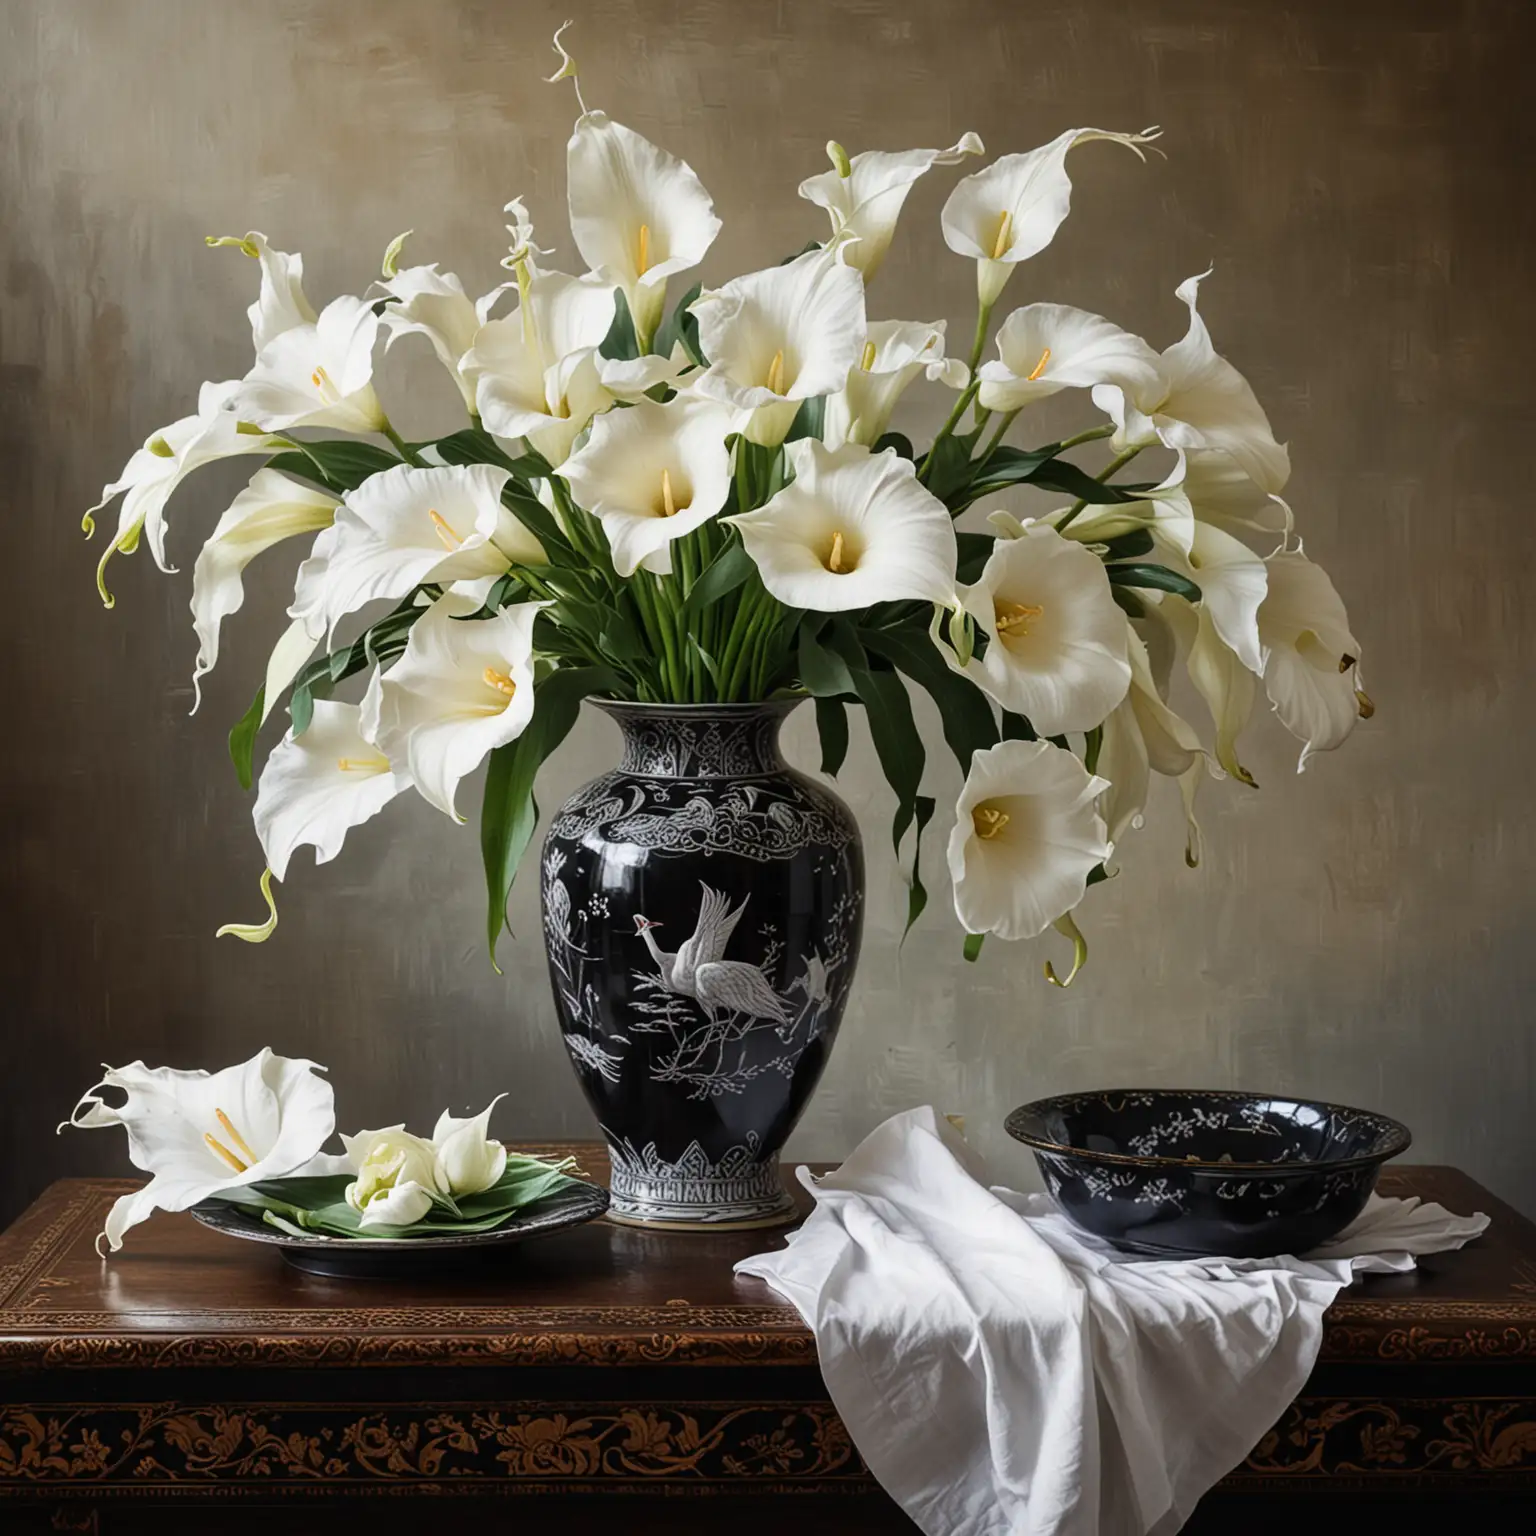 A STILL LIFE PAINTING, WITH A BLACK ORIENTAL VASE, DECORATED WITH WHITE CRANE BIRDS, , VASE CONYAINING  GIANT WHITE CALLA LILIES . SHOW A FOLDED NAPKIN ON THE TABLE